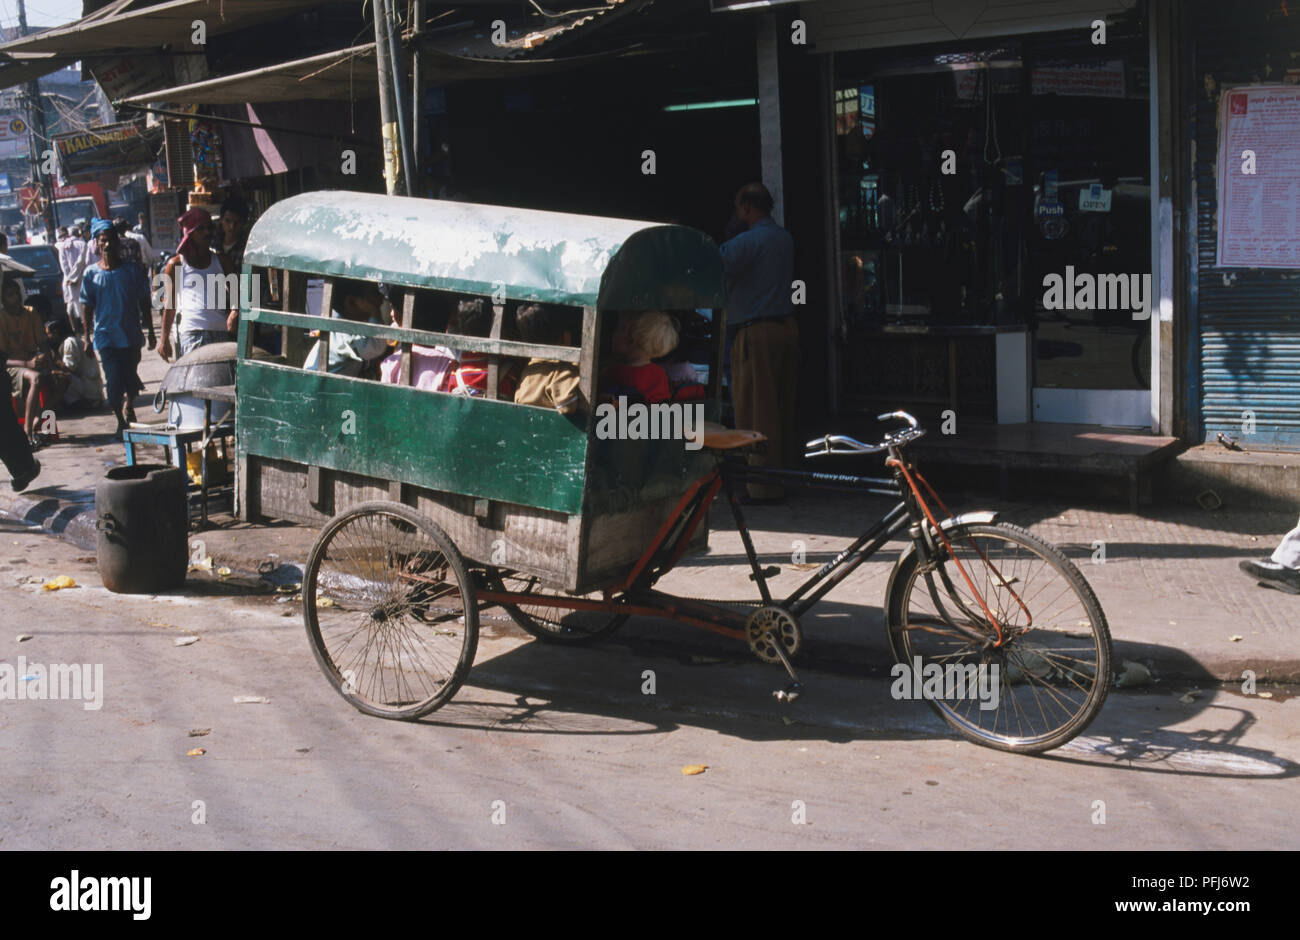 India, passengers sitting in tricycle carriage parked in street, side view. Stock Photo